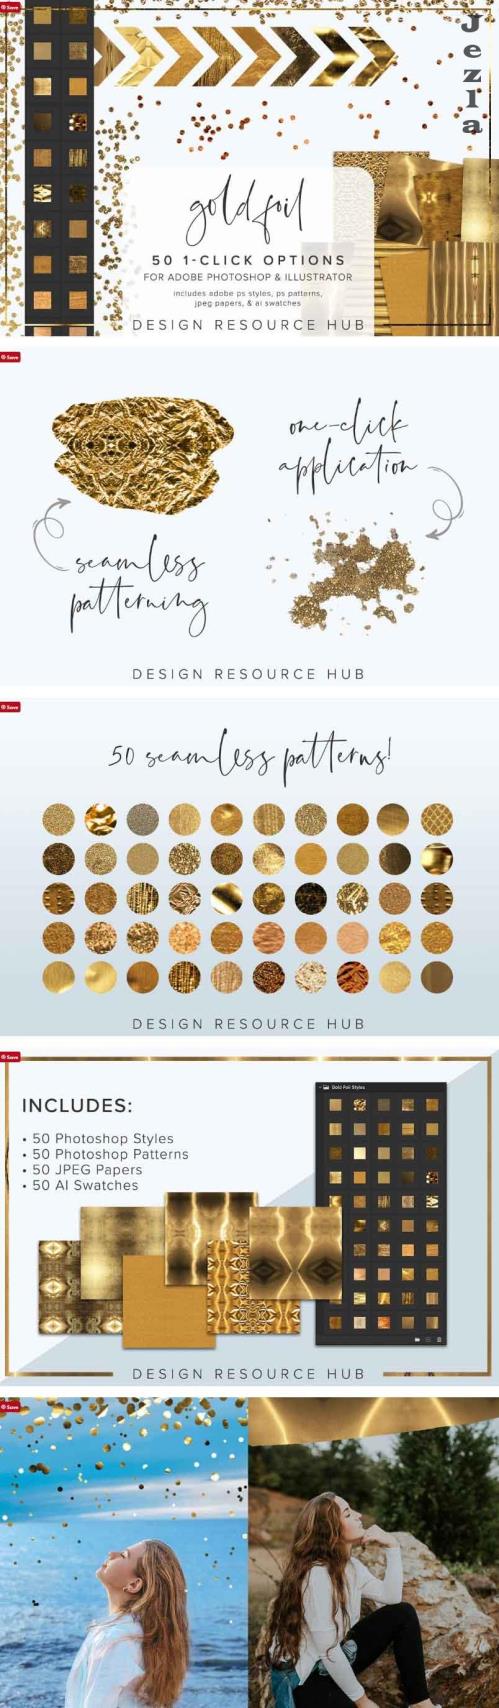 Gold Foil Photoshop Style Pack - 6966029